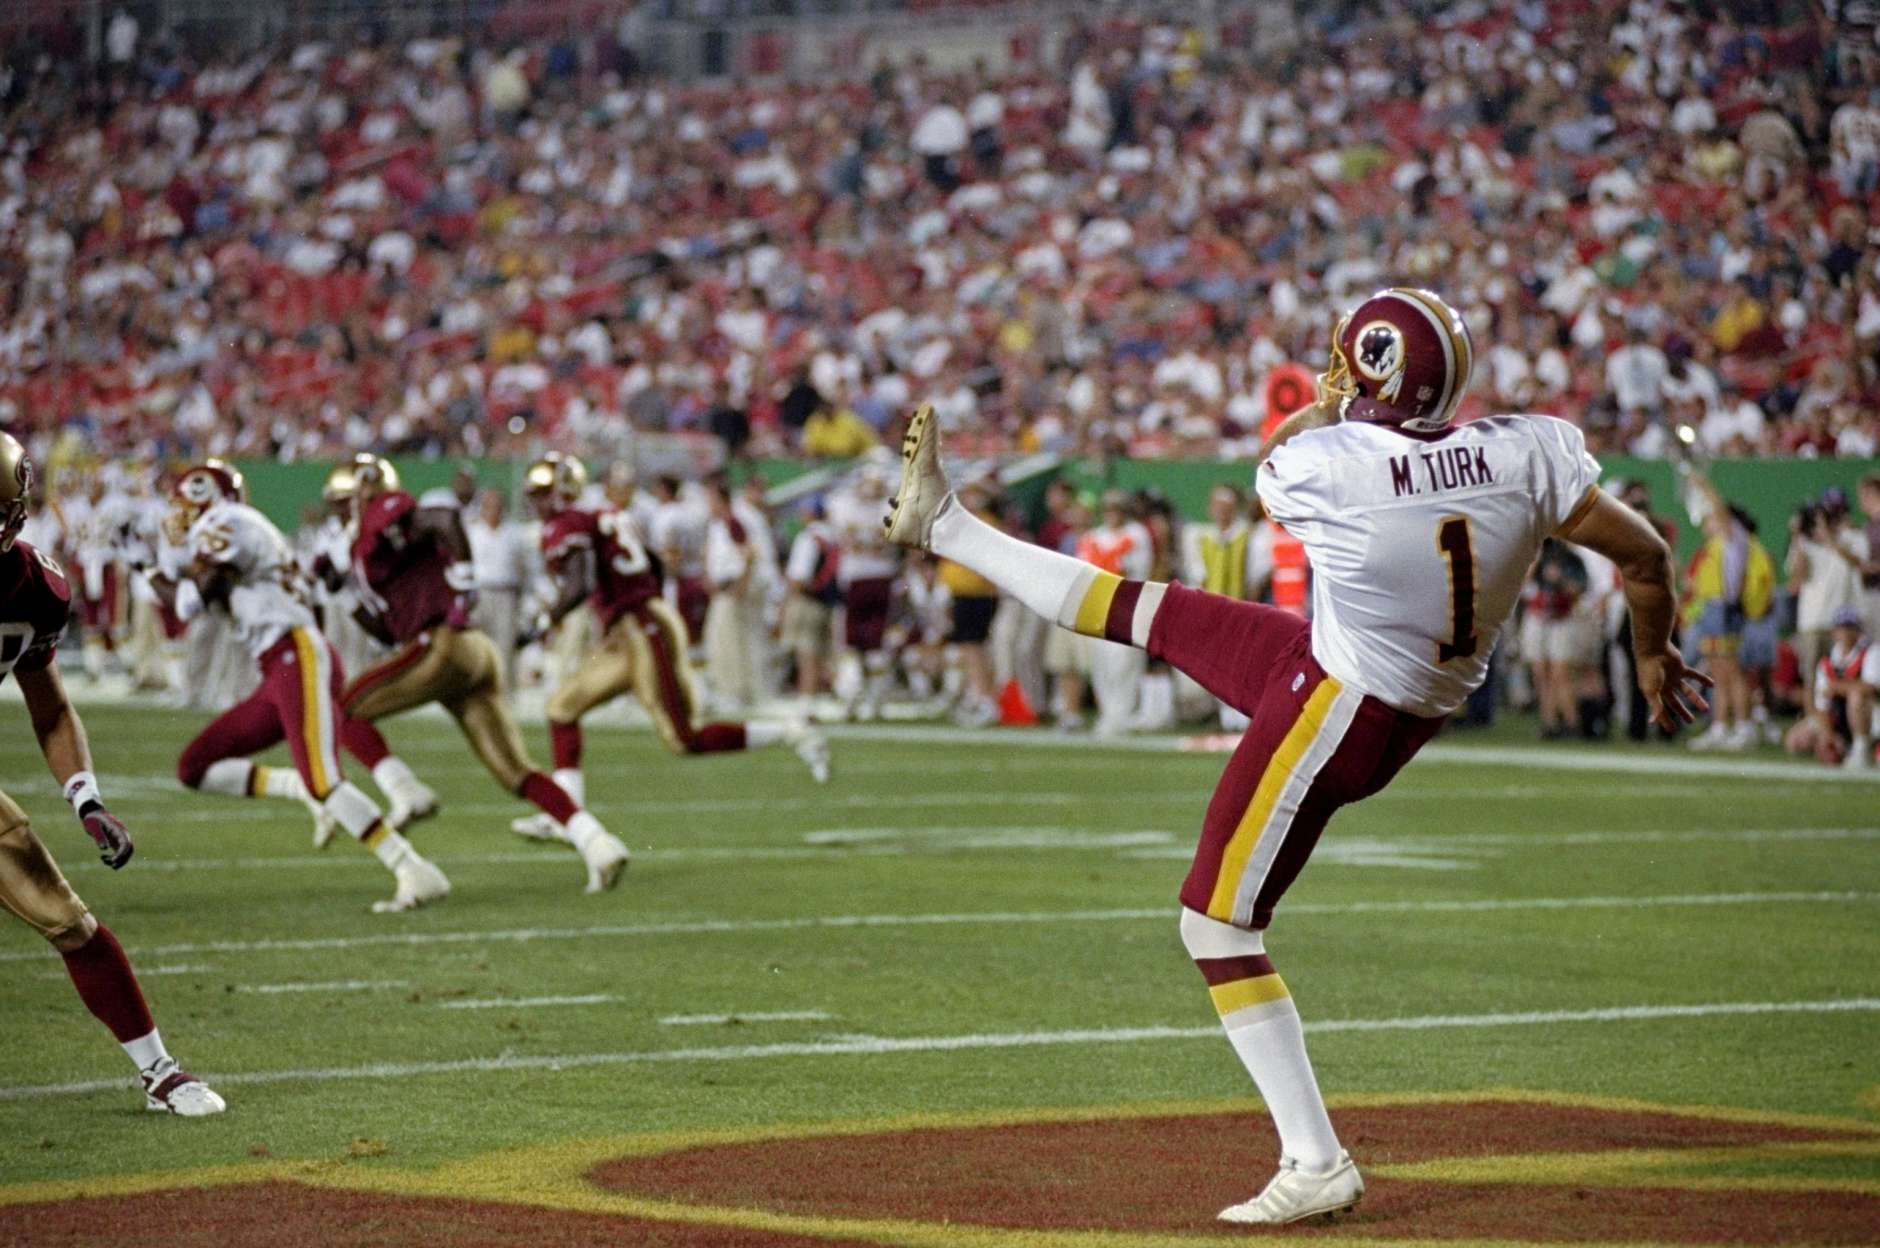 14 Sep 1998: Matt Turk #1 of the Washington Redskins punts during the game against the San Francisco 49ers at Jack Kent Stadium in Landover, Maryland. The 49ers defeated the Redskins 45-10.